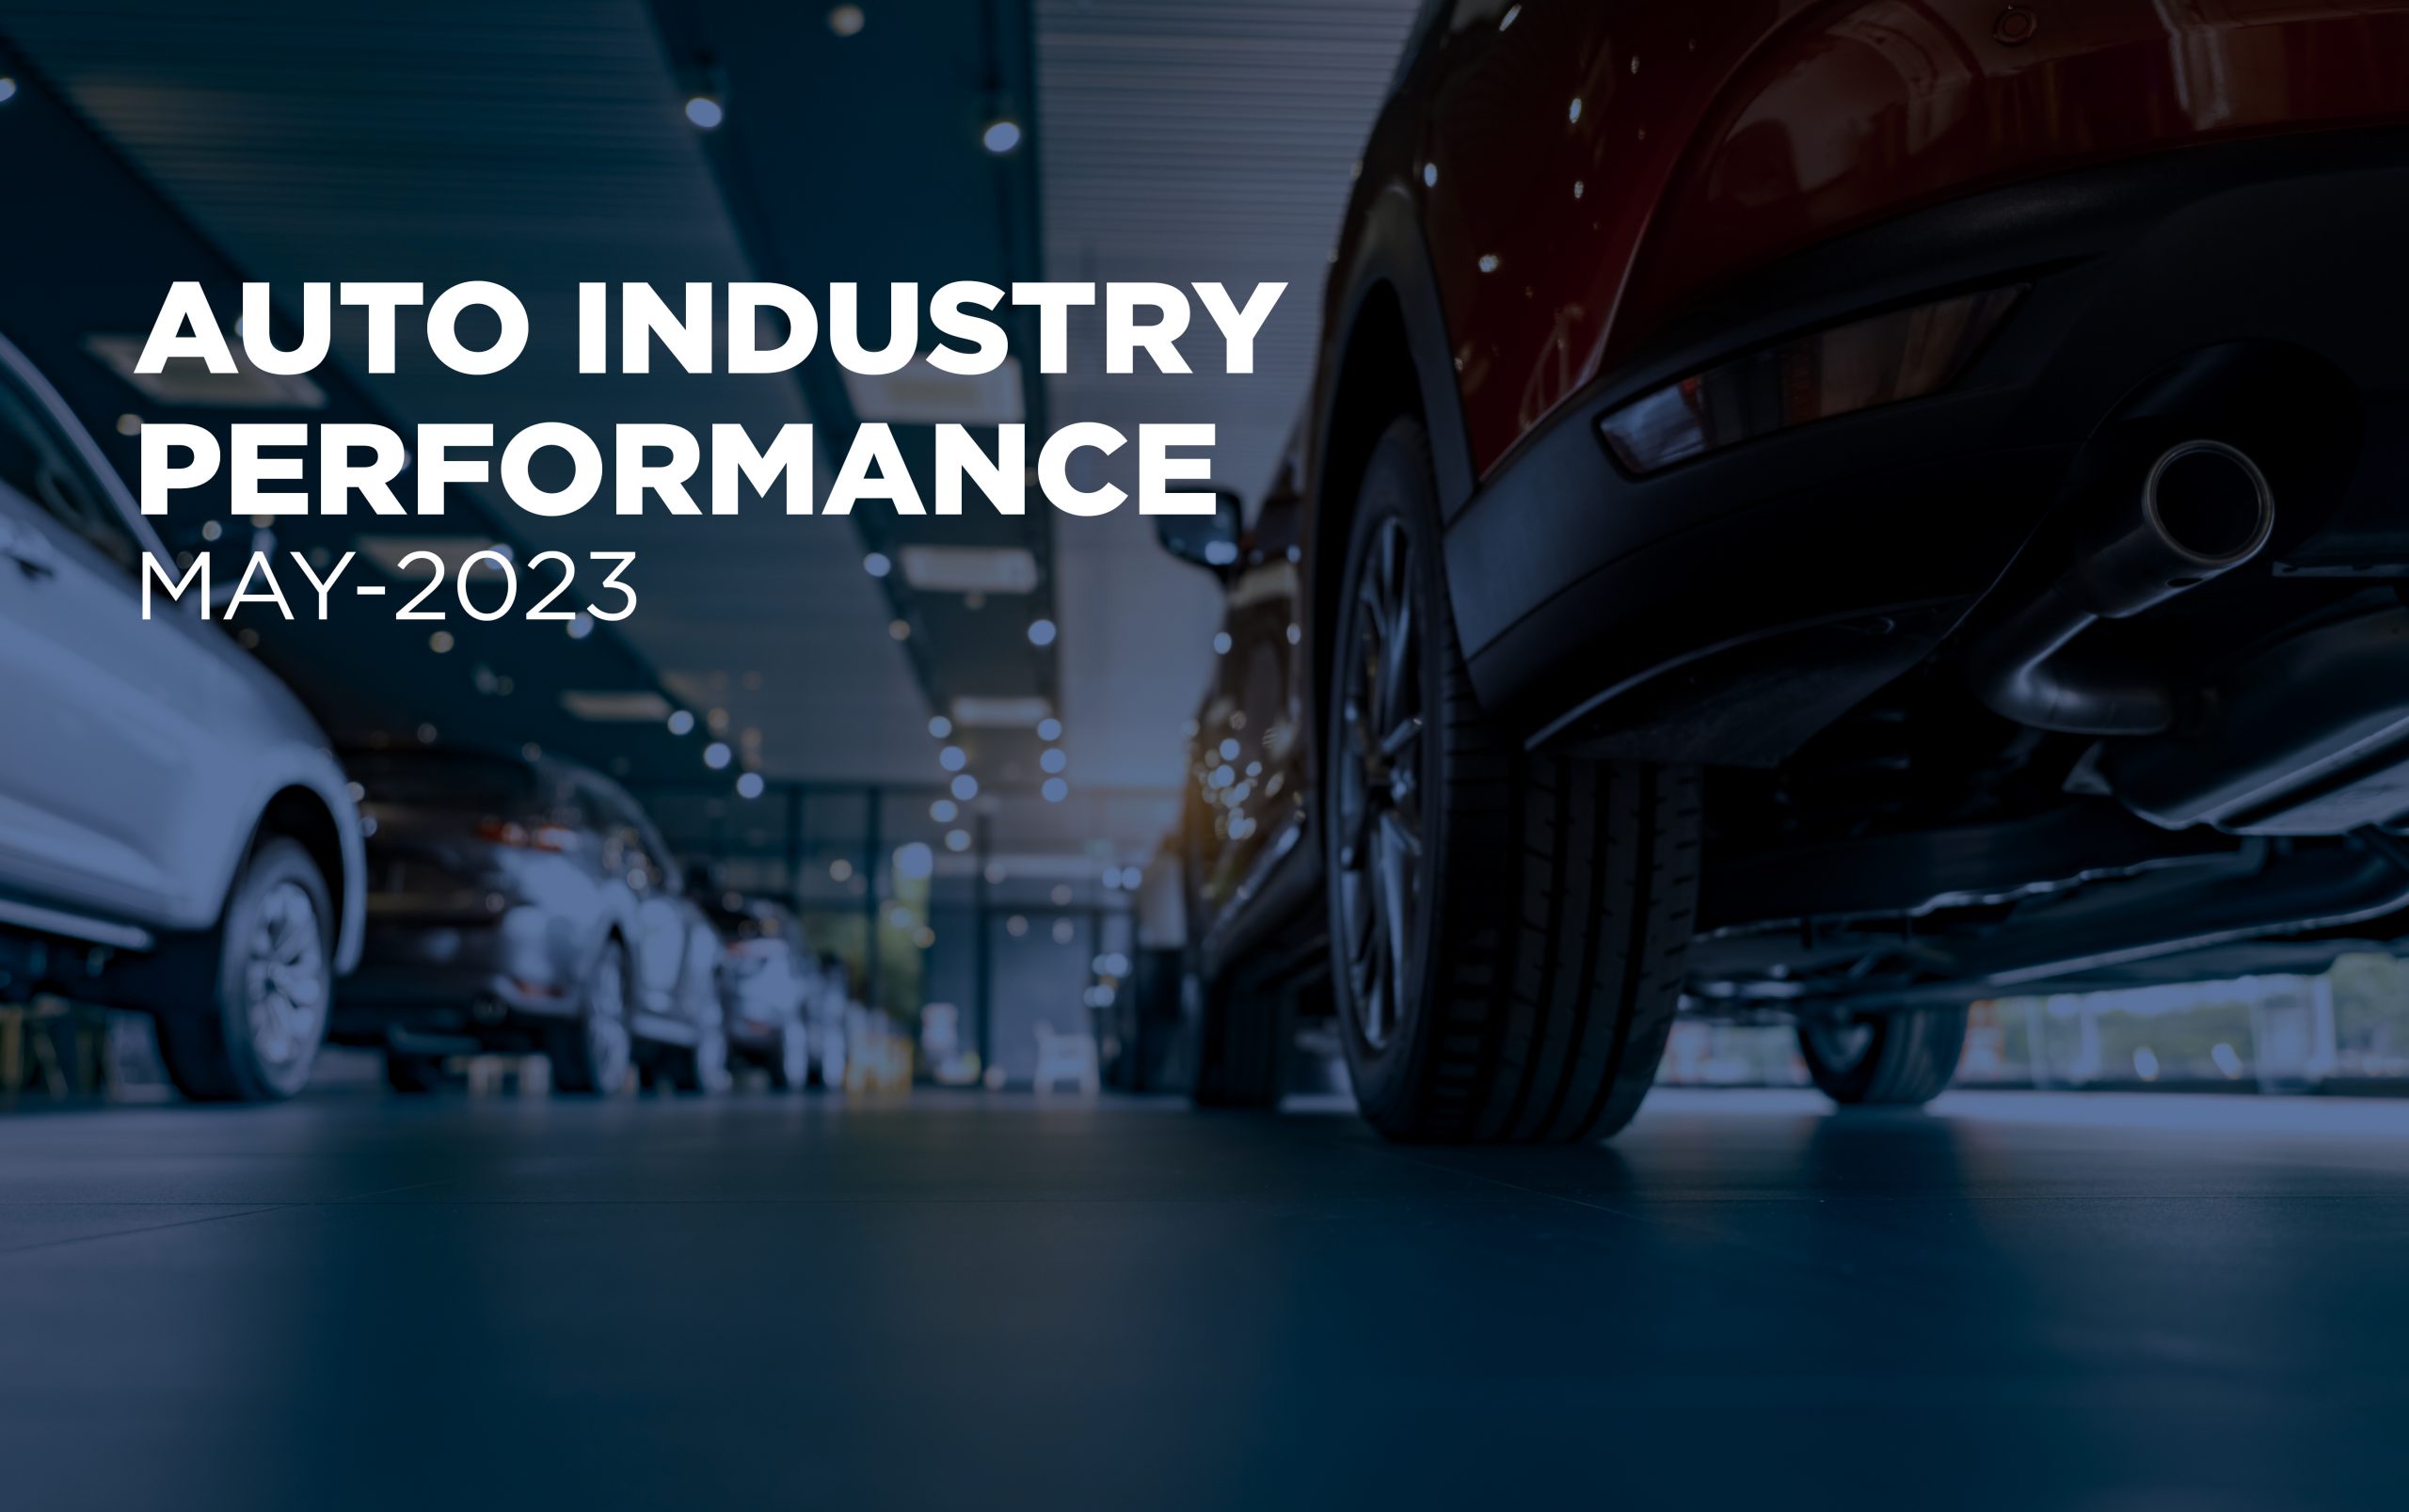 Auto Industry Performance of May-2023 | World Auto Forum